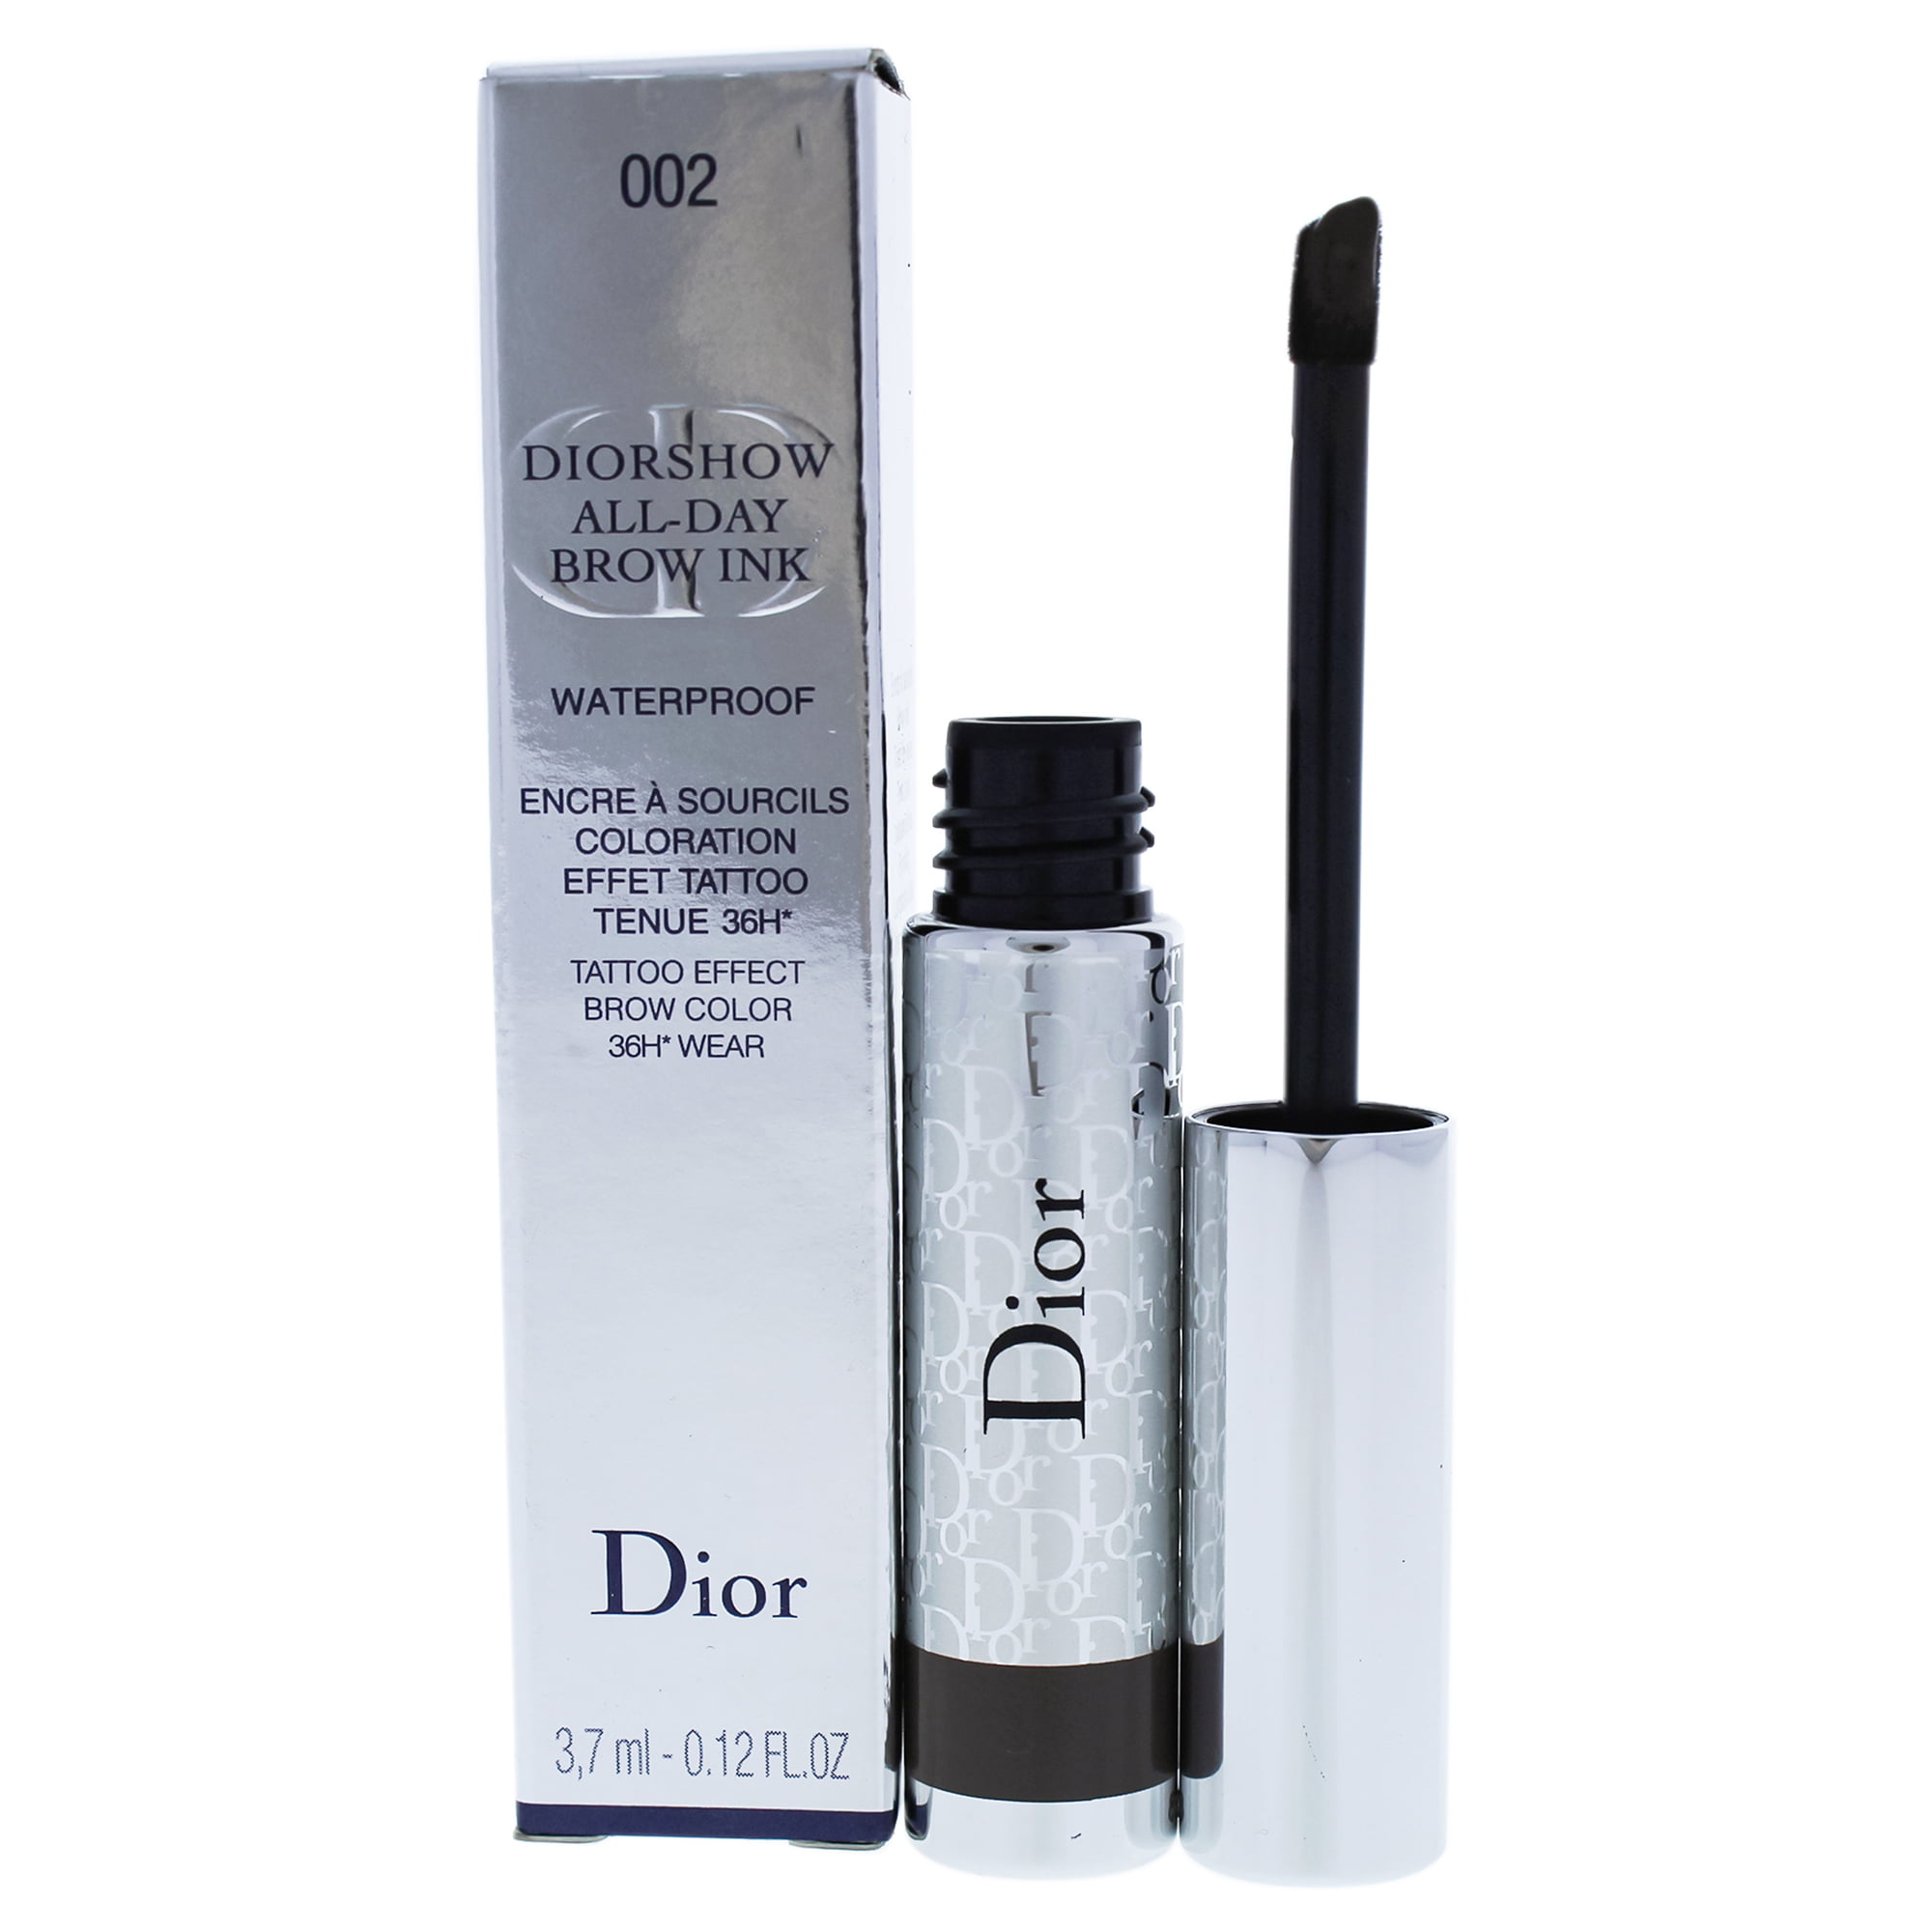 Dior - Diorshow All-Day Brow Ink Waterproof - 002 Dark by Christian